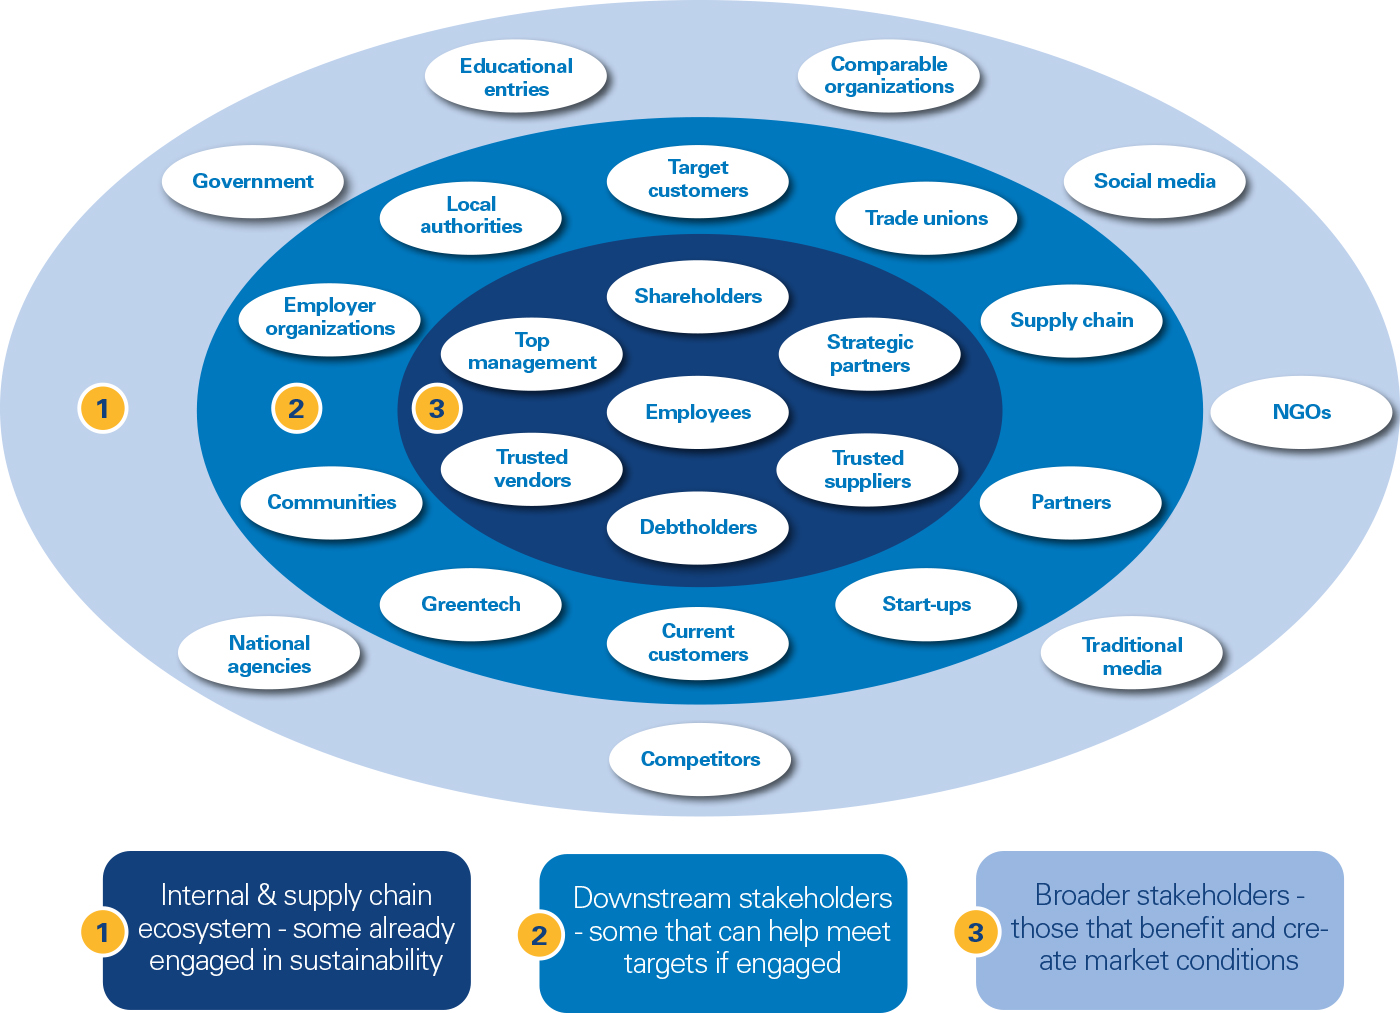 Figure 1: Stakeholders within the ecosystem